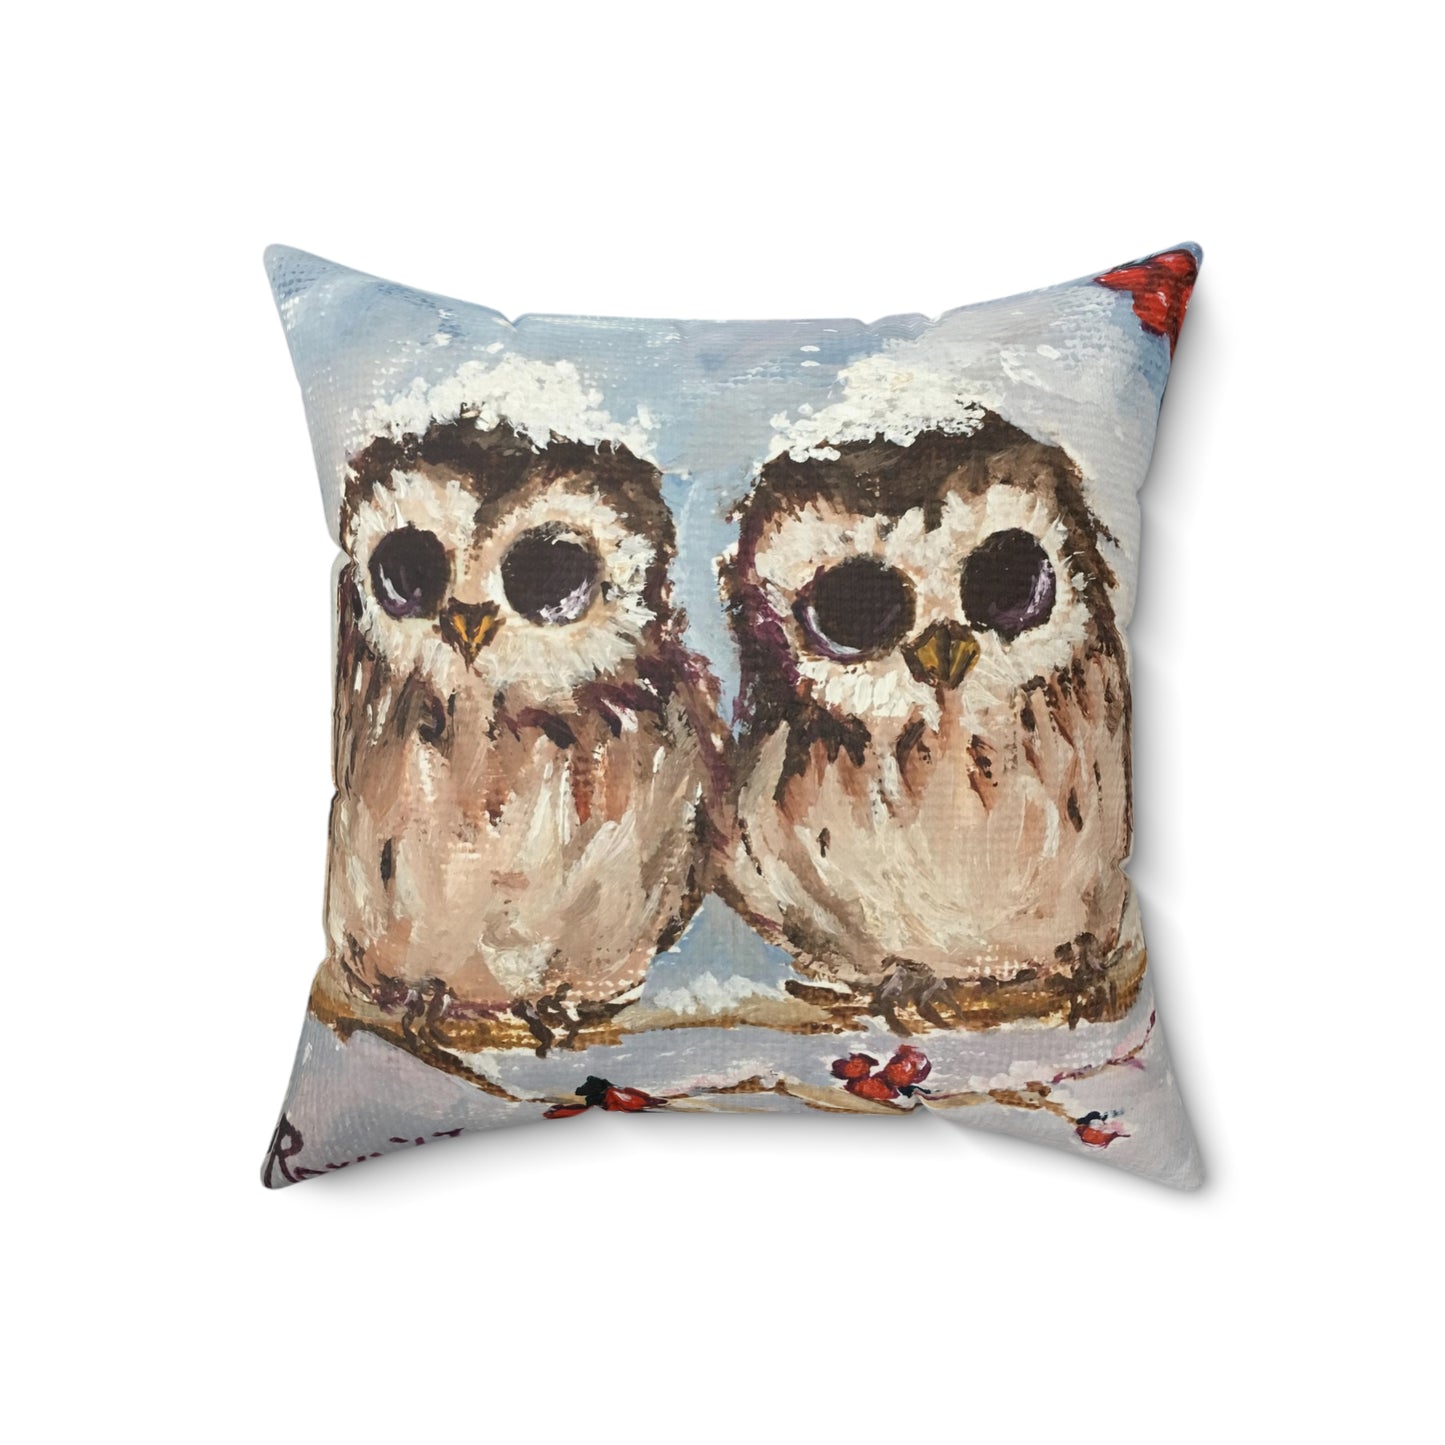 Adorable Owl Chicks with Snow on their Heads Indoor Spun Polyester Square Pillow